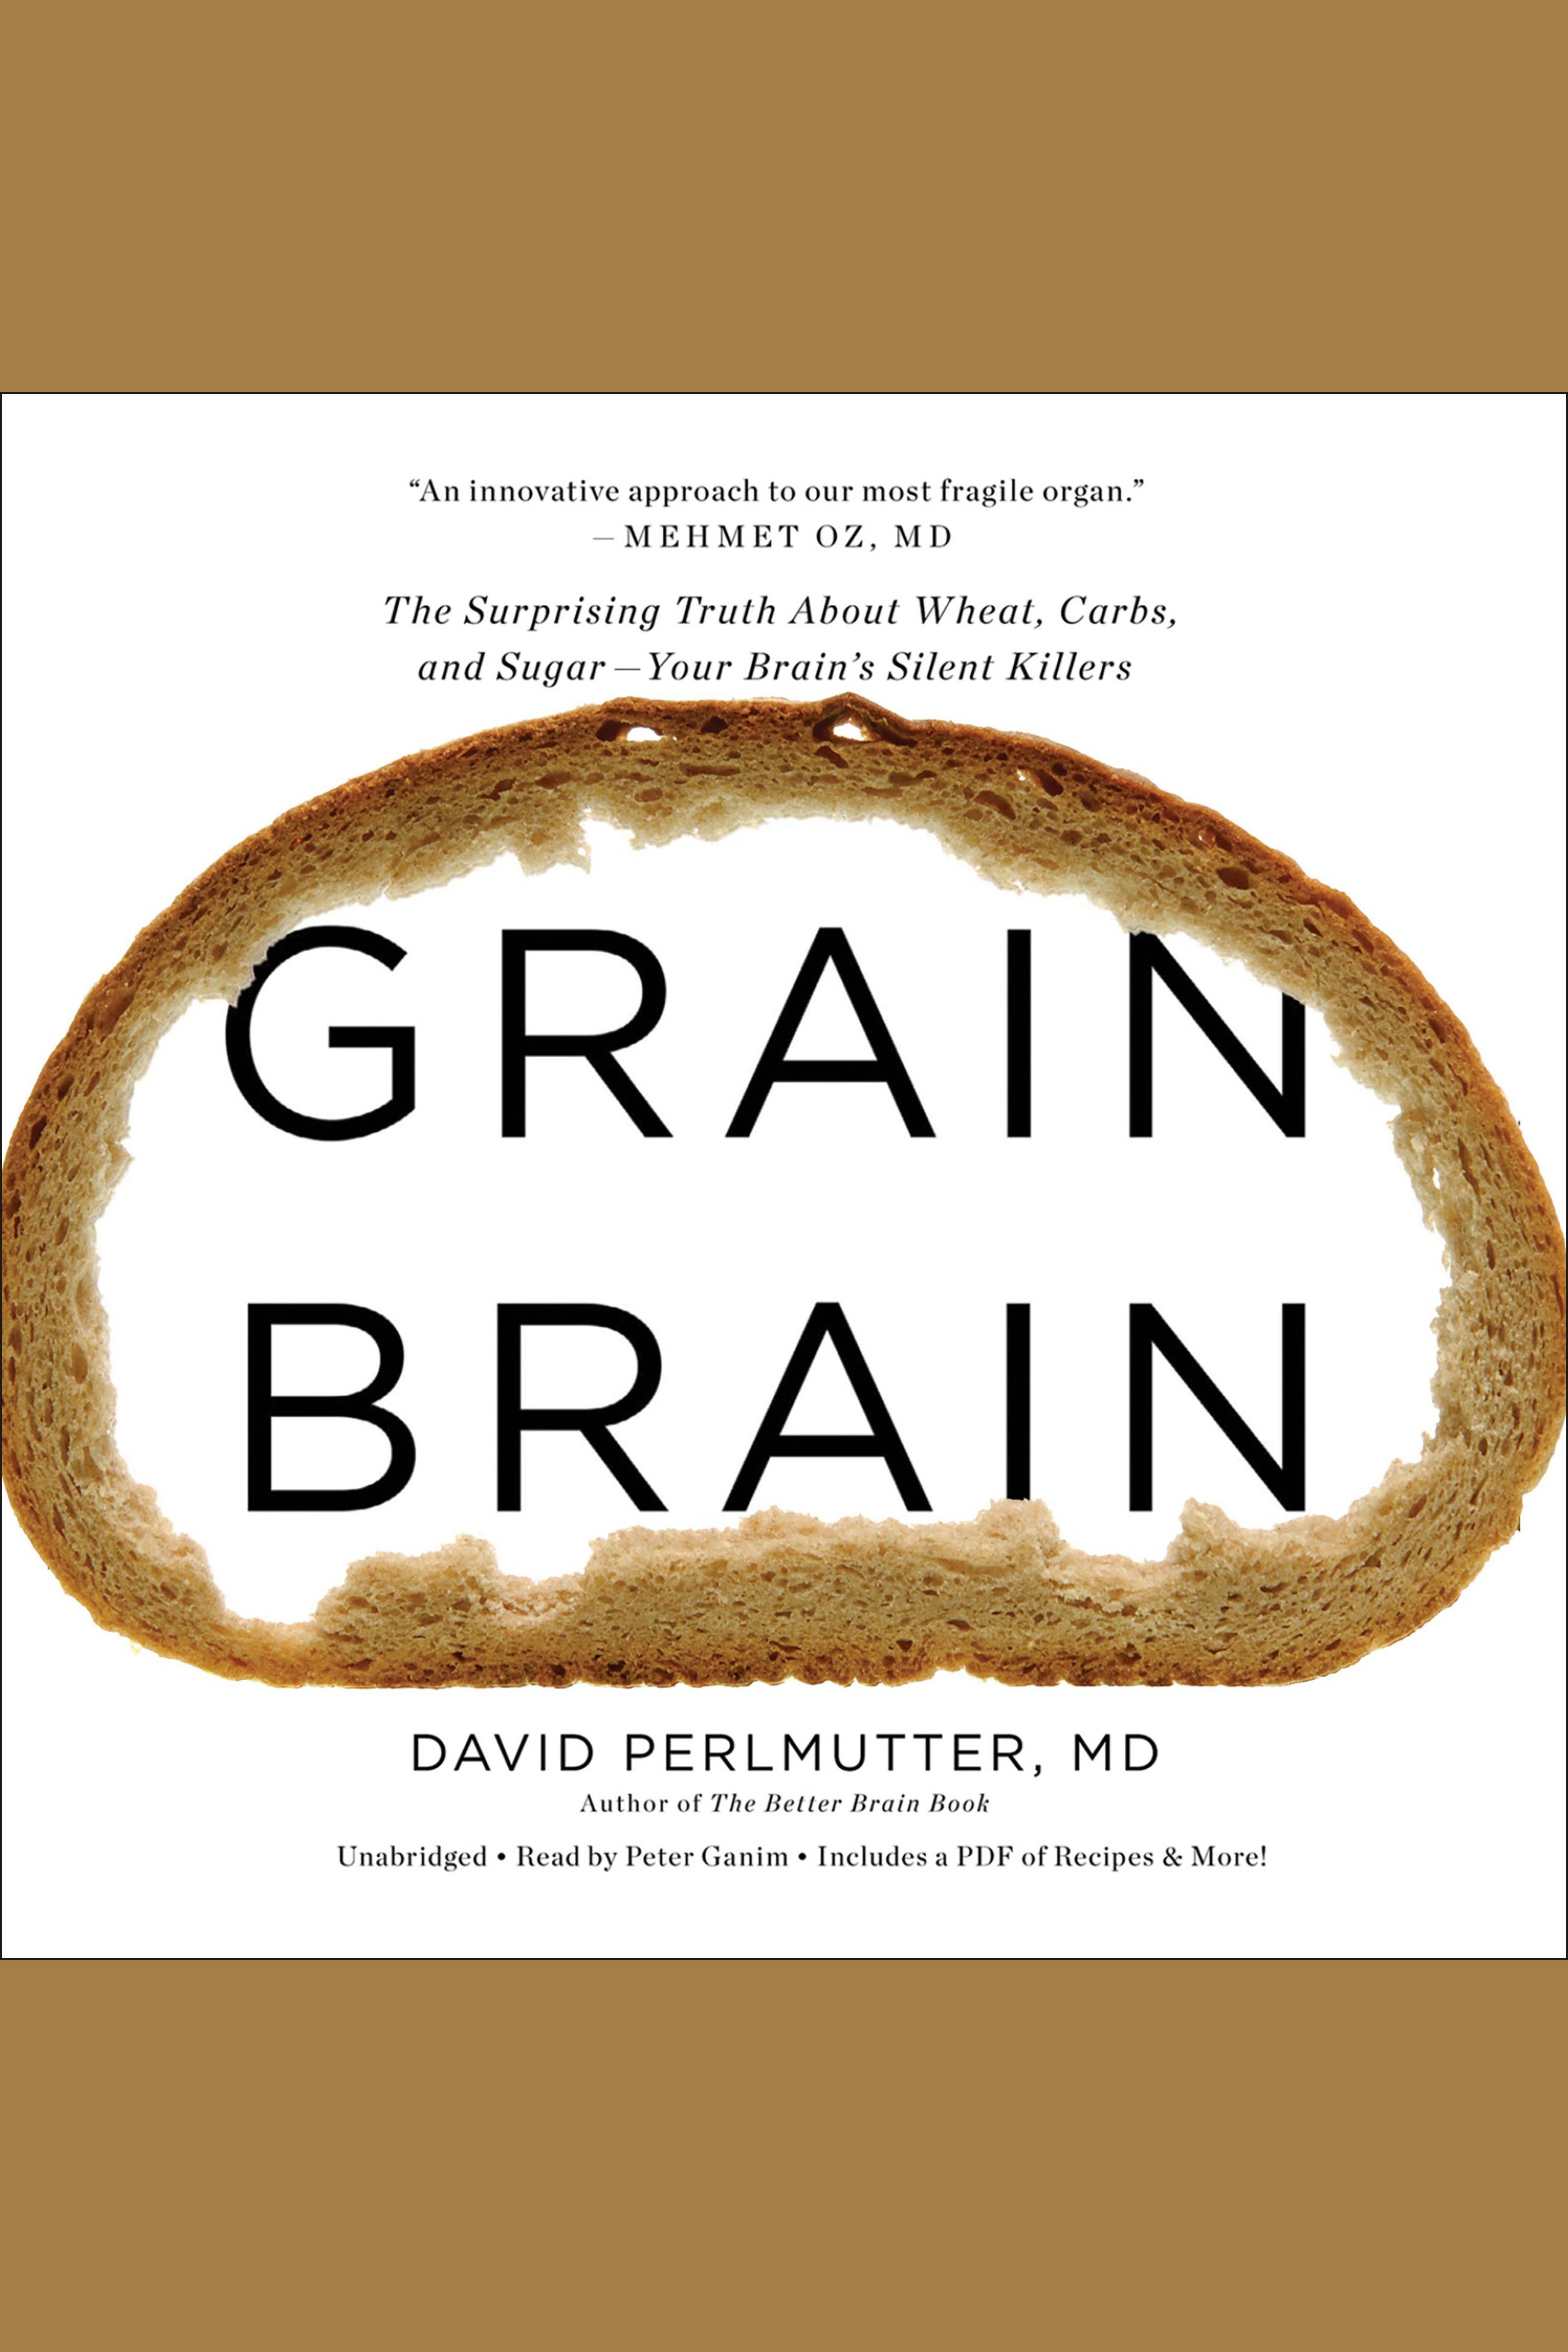 Grain brain the surprising truth about wheat, carbs, and sugar--your brain's silent killers cover image